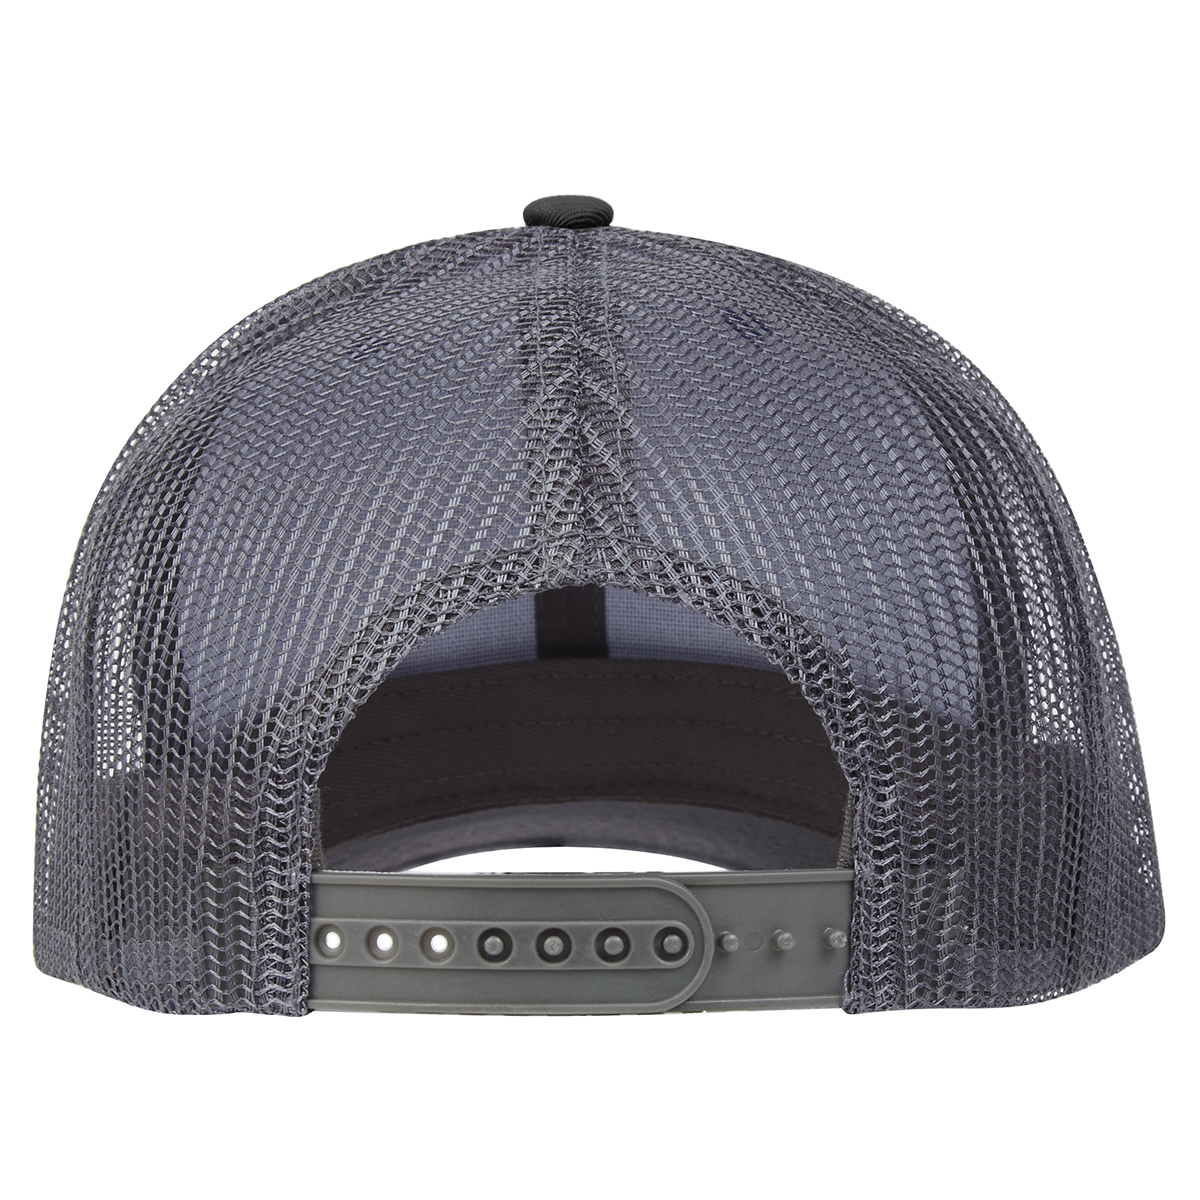 #1021 Cotton Twill Mesh Back Cap - Hit Promotional Products